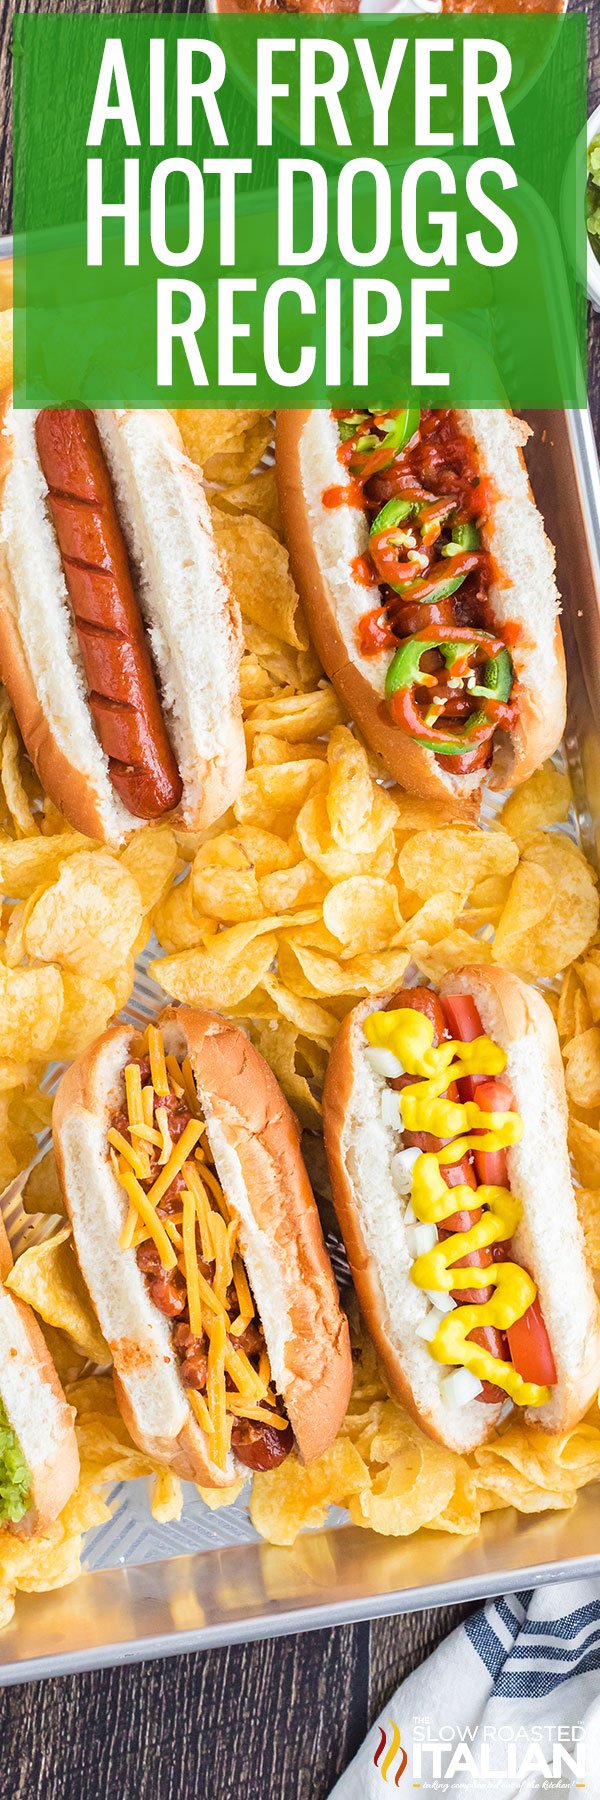 titled image (and shown): air fryer hot dogs